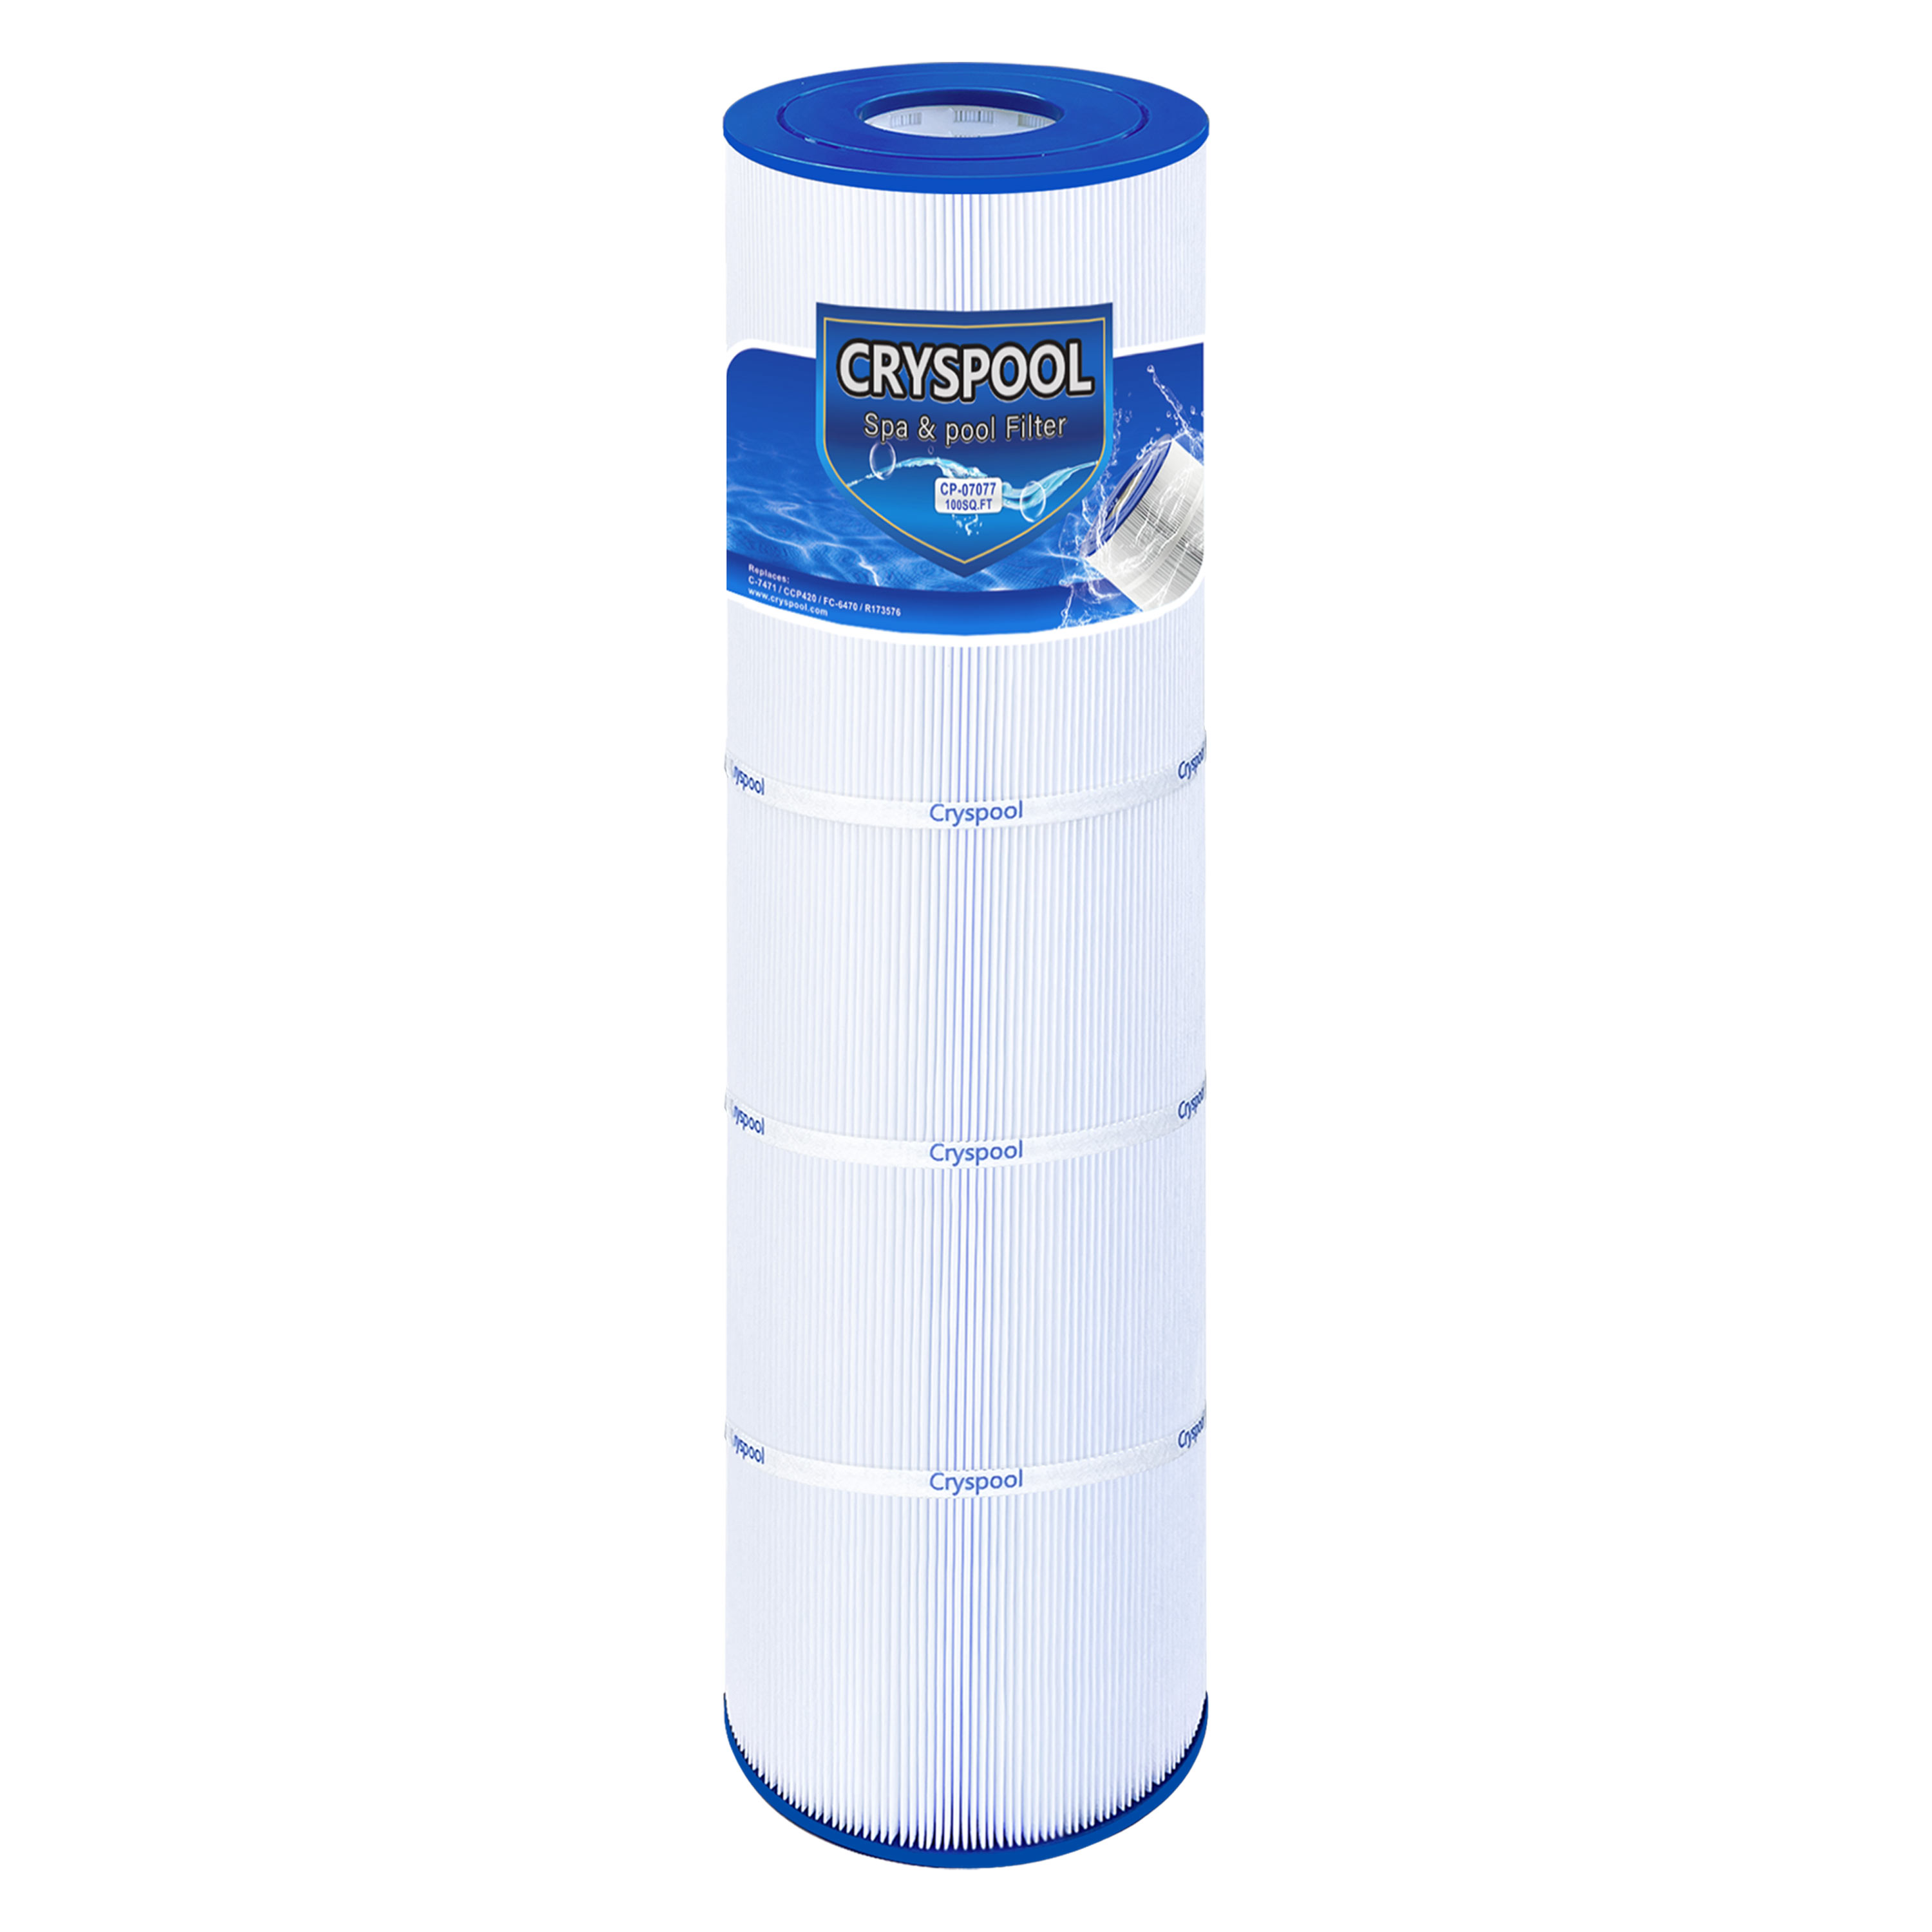 Cryspool Pool Filter Compatible with Pentair CCP420,PCC105-PAK4,Unicel C-7471, R173576,178584, Clean and Clear Plus 420, Filbur FC-6470 Featured Image